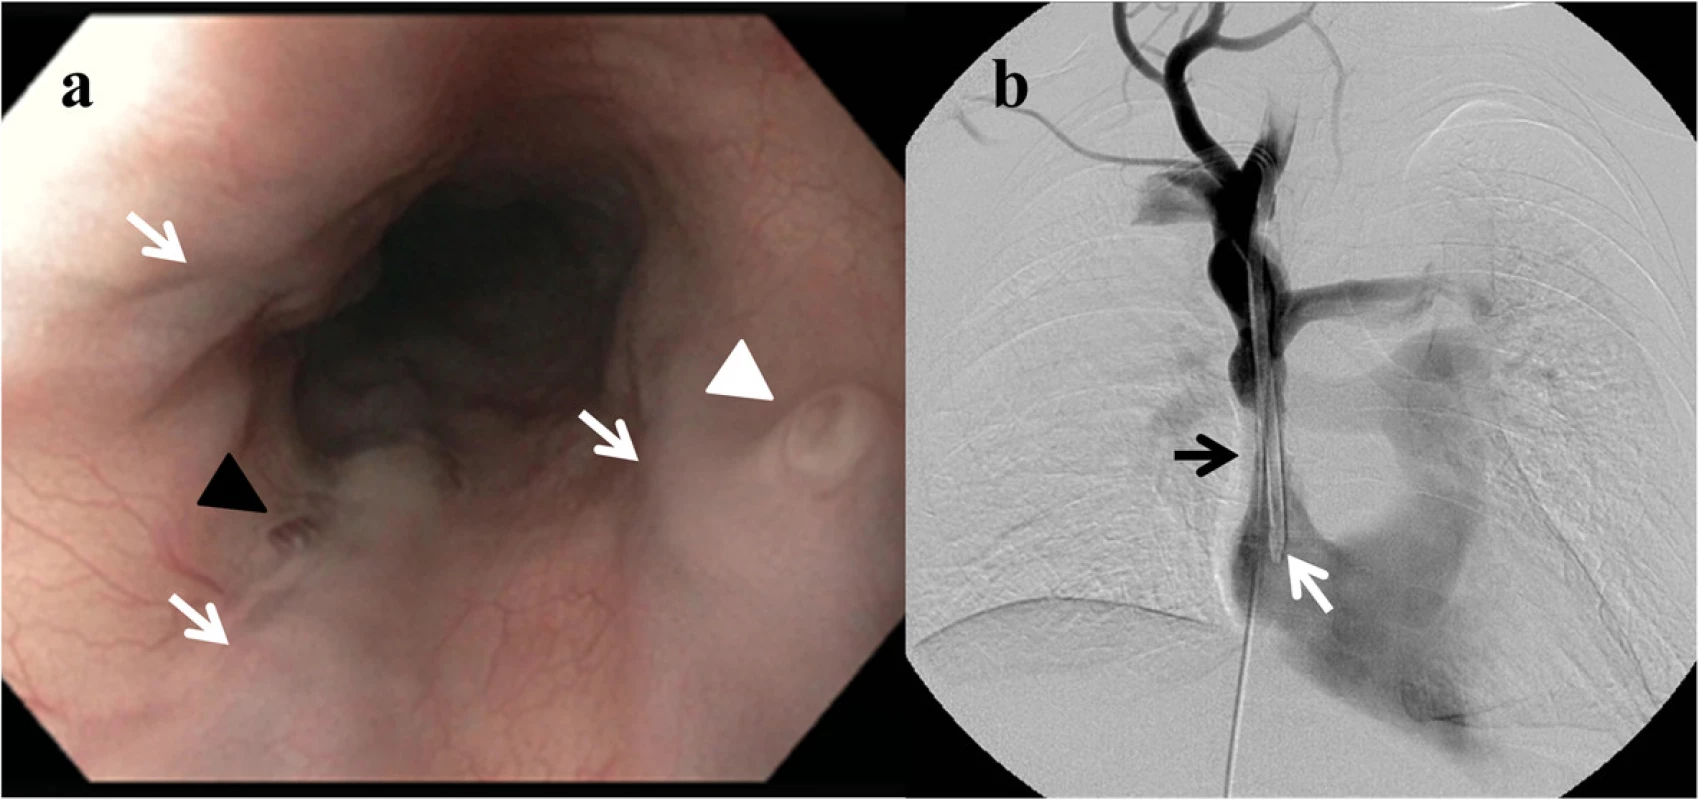 a Esophagogastroduodenoscopy in a patient with superior vena cava obstruction demonstrating varices in the proximal esophagus (white arrows), with overlying red wales (black arrowhead) and a fibrin plug (‘nipple sign’) (white arrowhead), indicating recent hemorrhage. b Venography of the superior vena cava showing a tunneled dialysis catheter (white arrow) with an adjacent superior vena cava stenosis (black arrow)